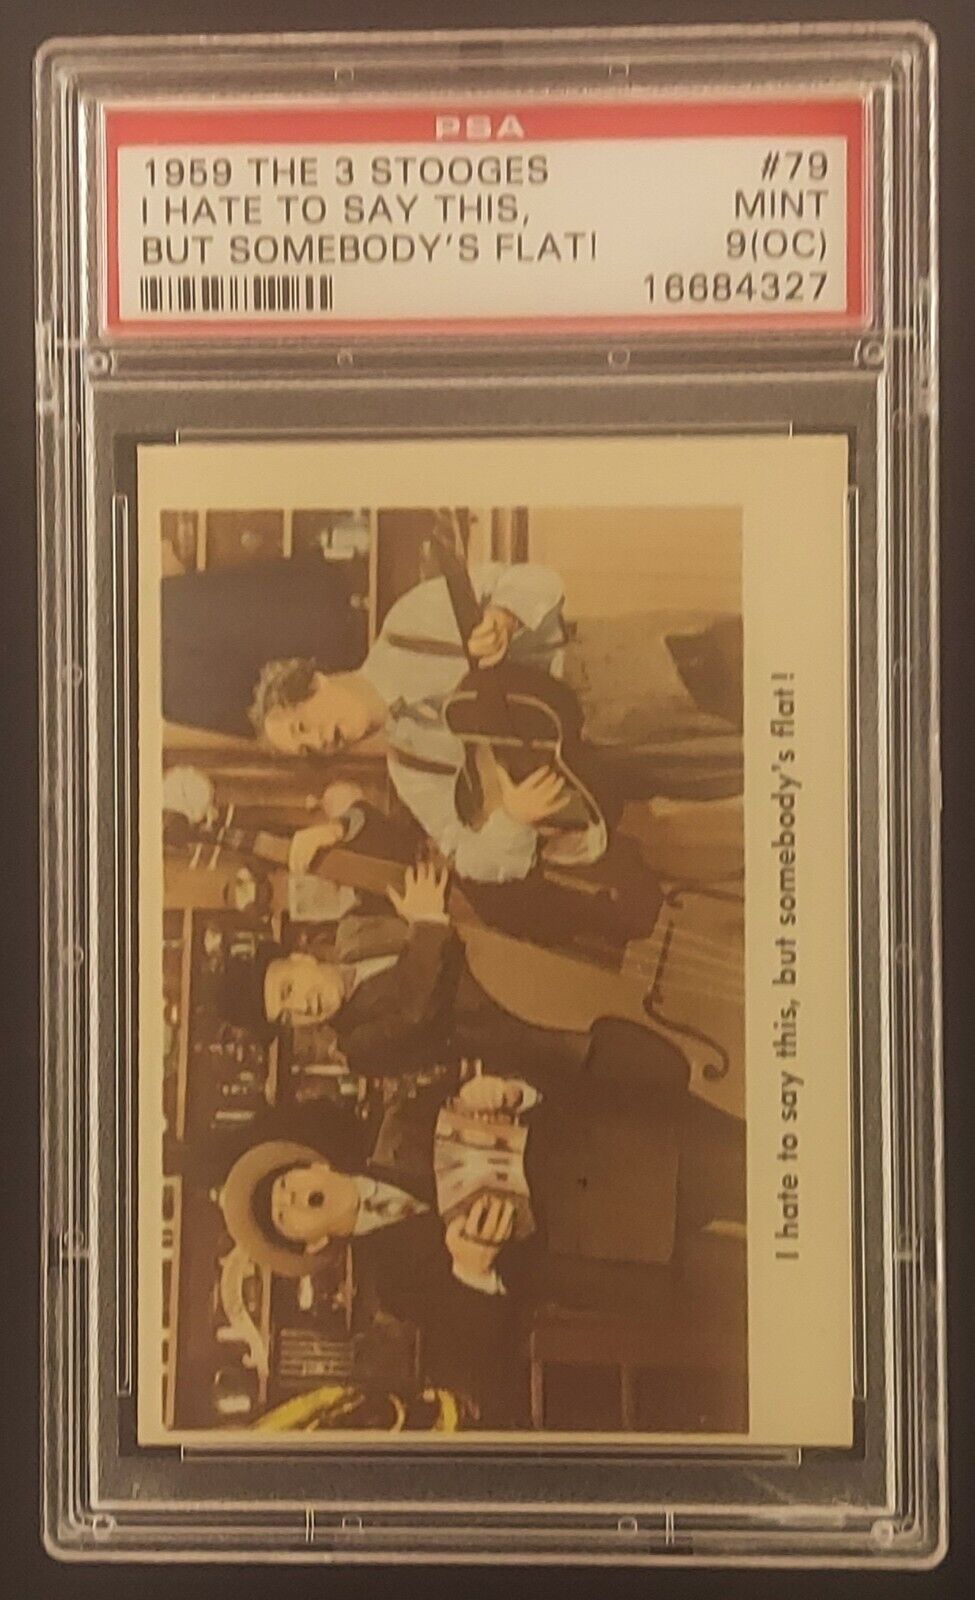 1959 Fleer The 3 Stooges 'I Hate To Say This...' #79 PSA 9 (OC)